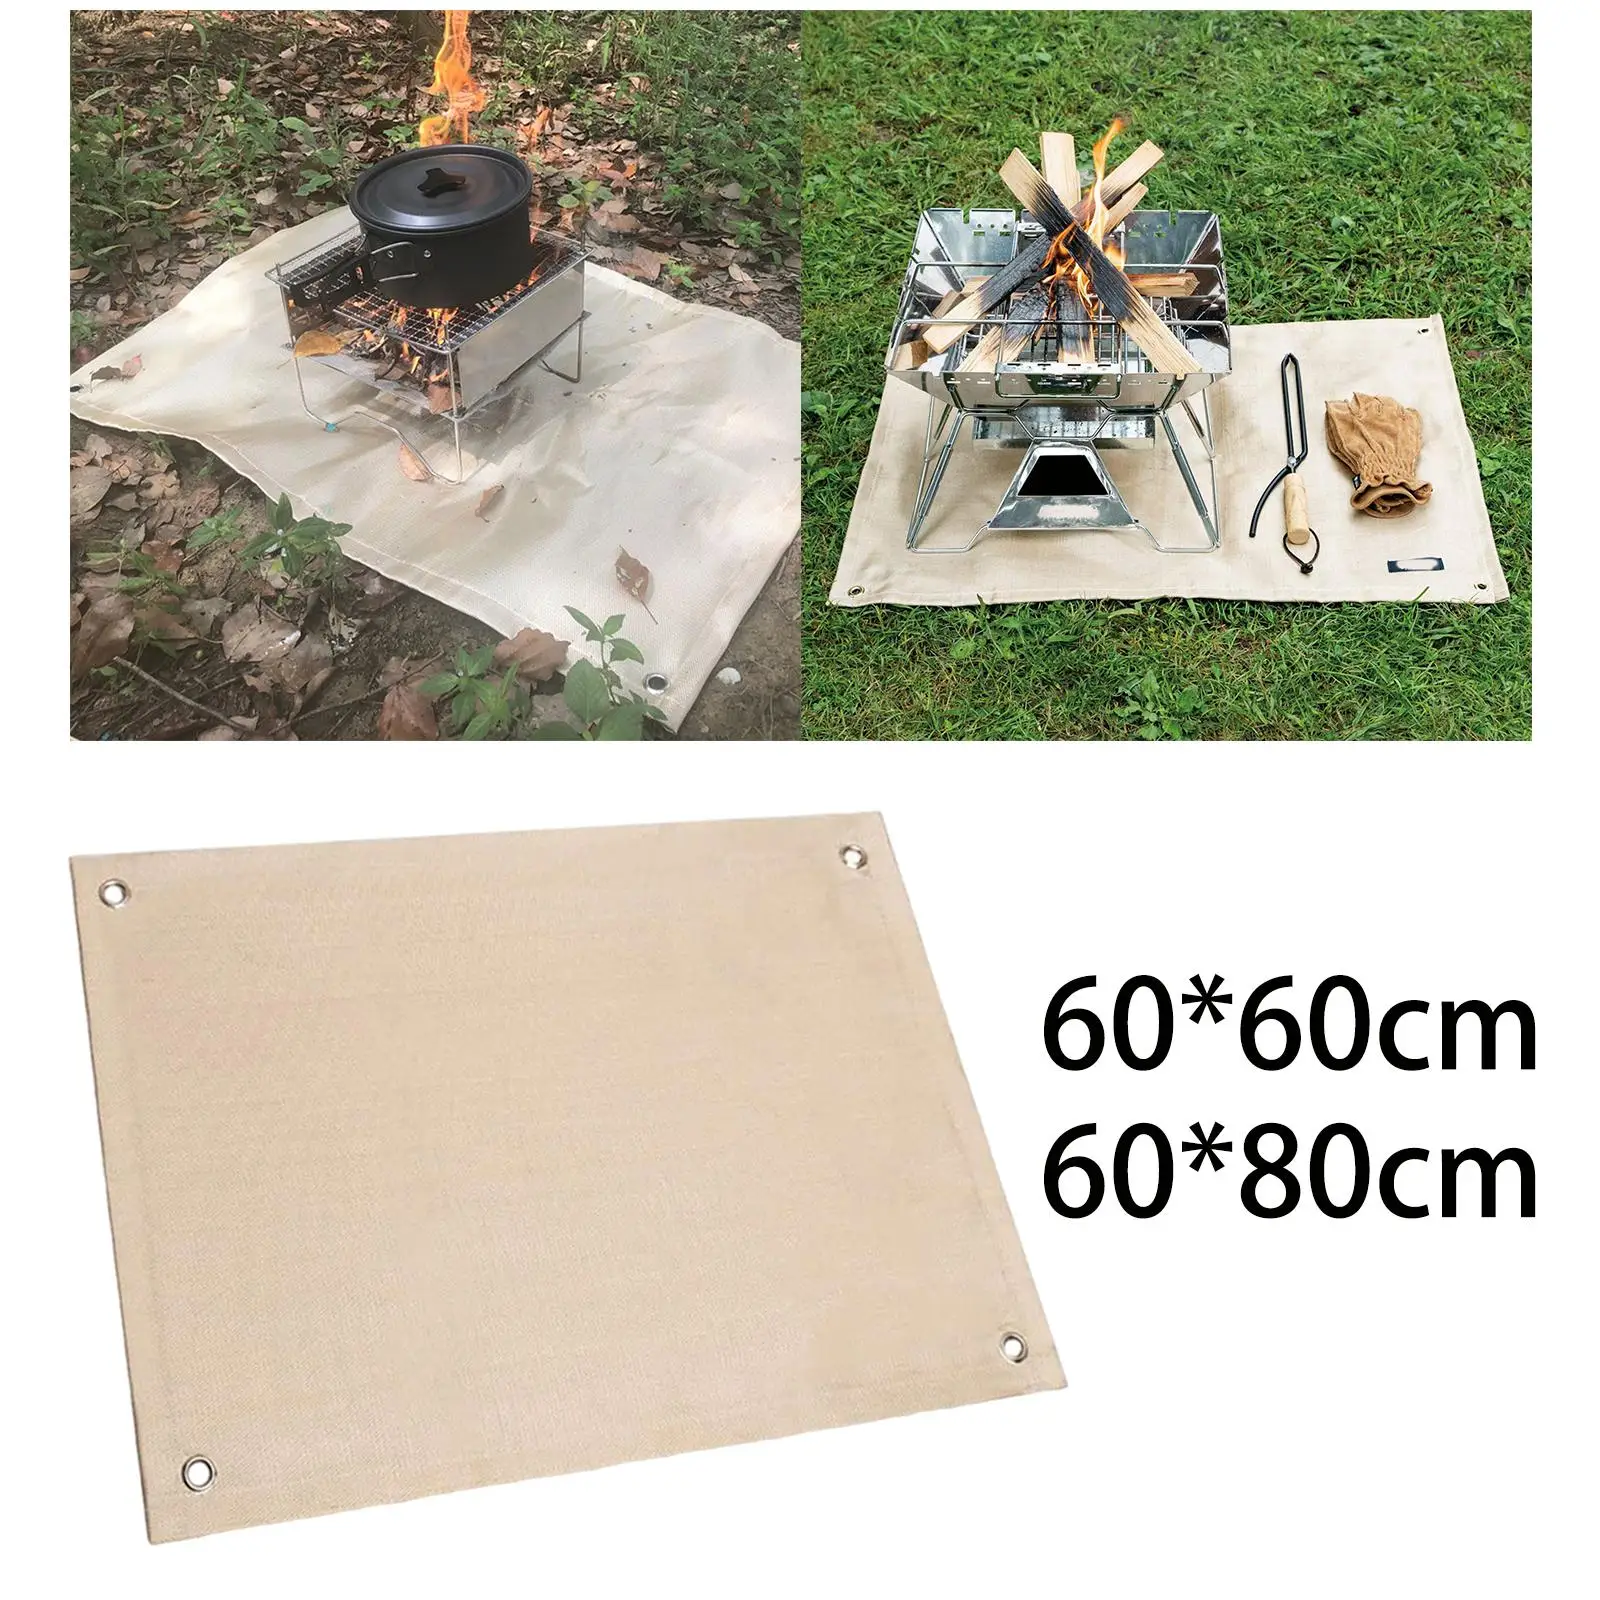 Camping Fire Blanket Shockproof High Temperature Resistant Anti Scald Fireproof Mat for Picnics Lawn Outdoor Activities Deck BBQ